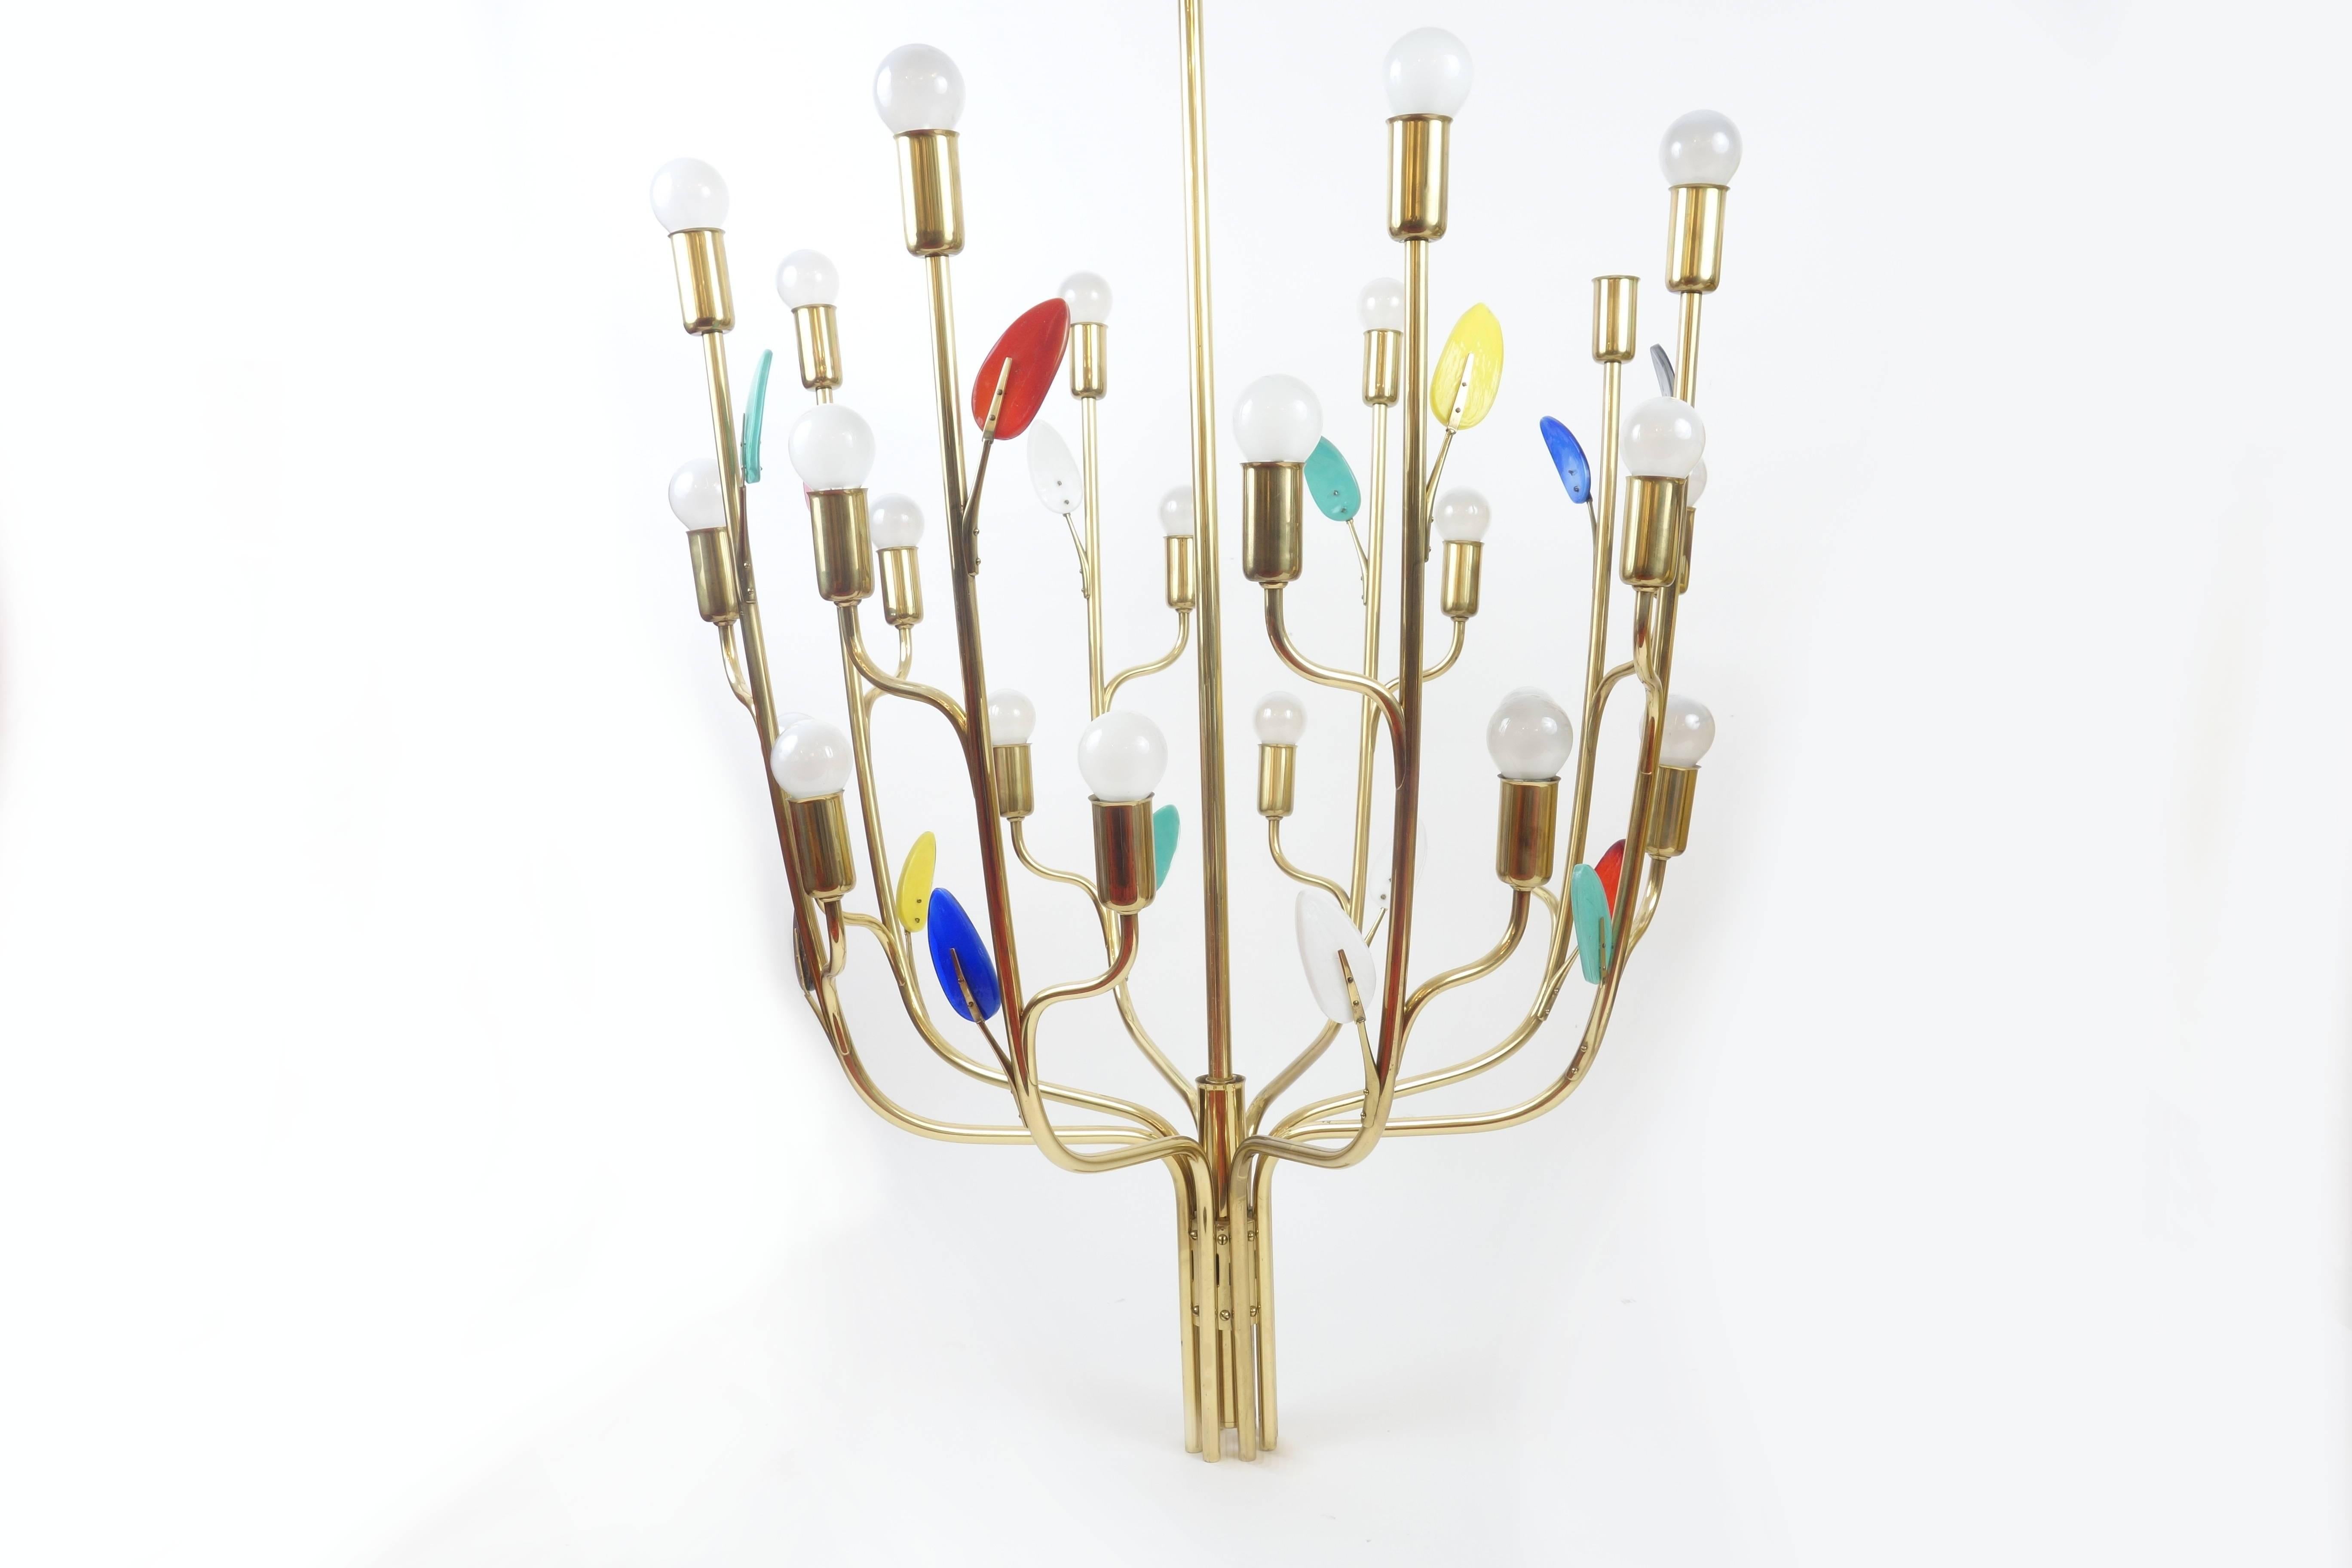 Large chandelier by Kalmar from the 1950s with multicolored glass decoration on brass frame.